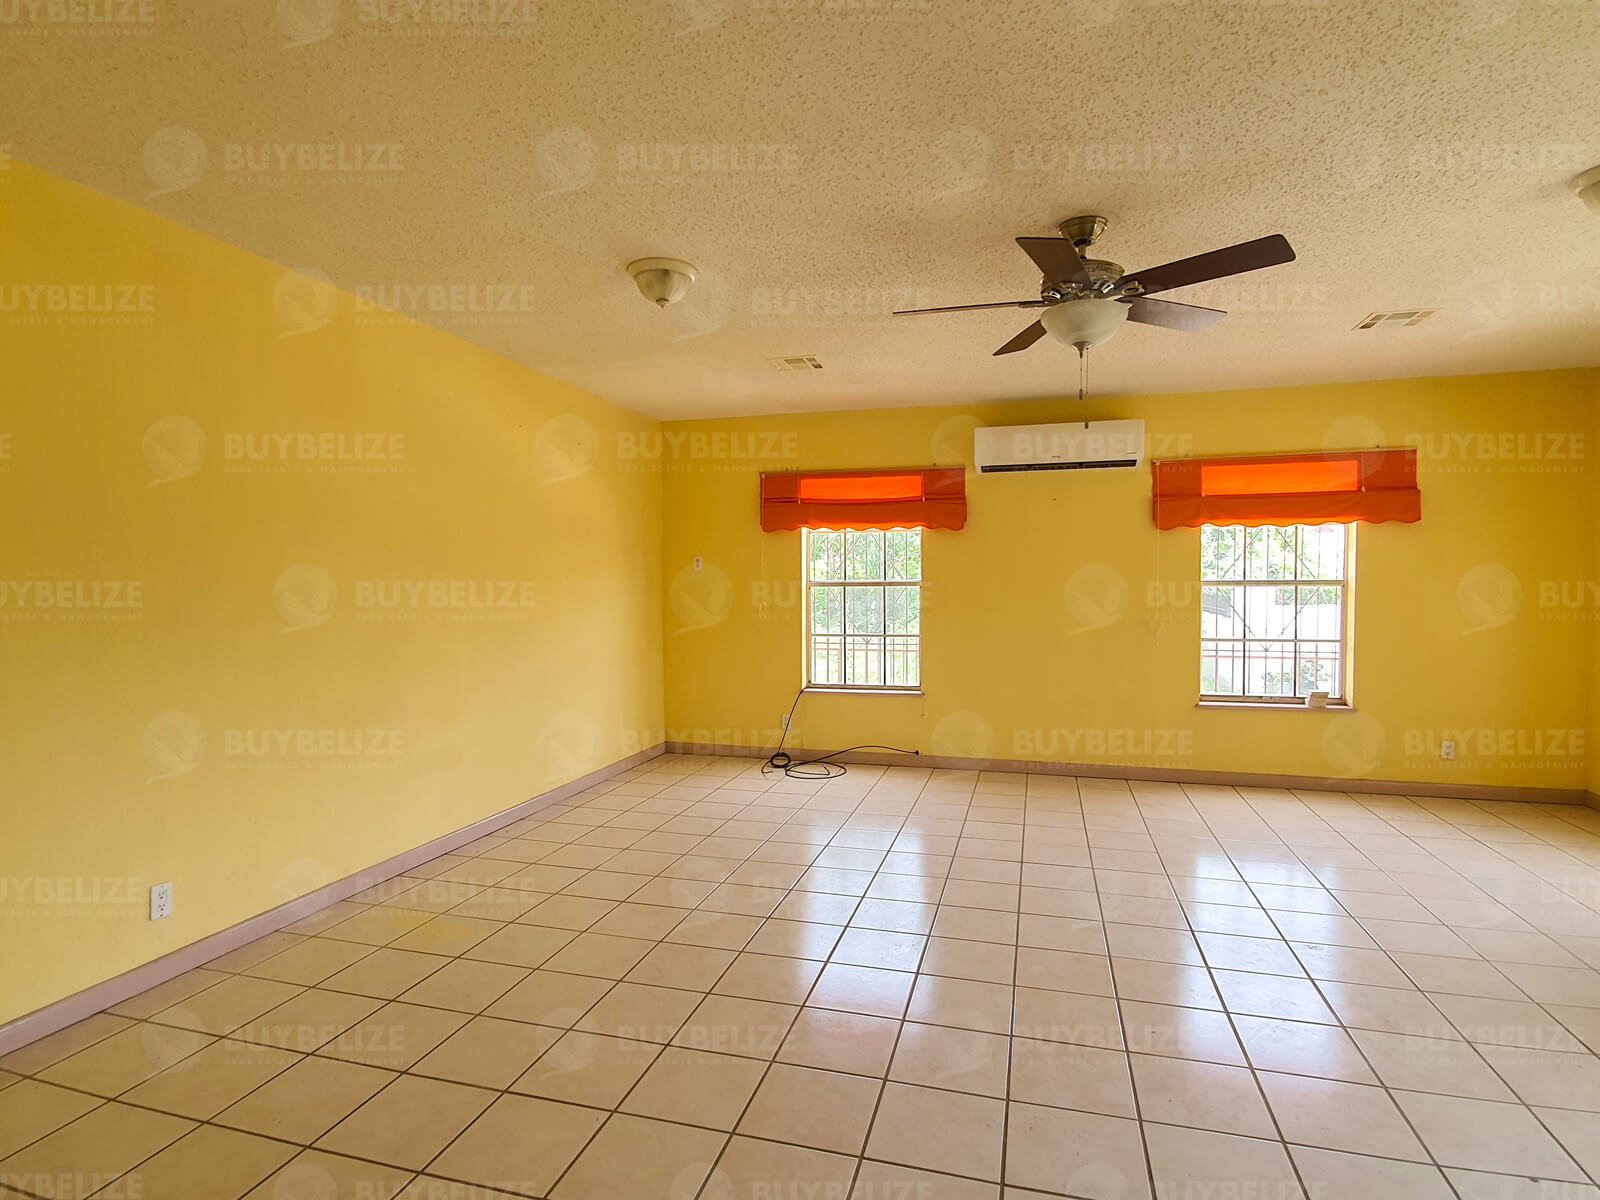 5 Bed 2 Bath House for Rent in Belize City